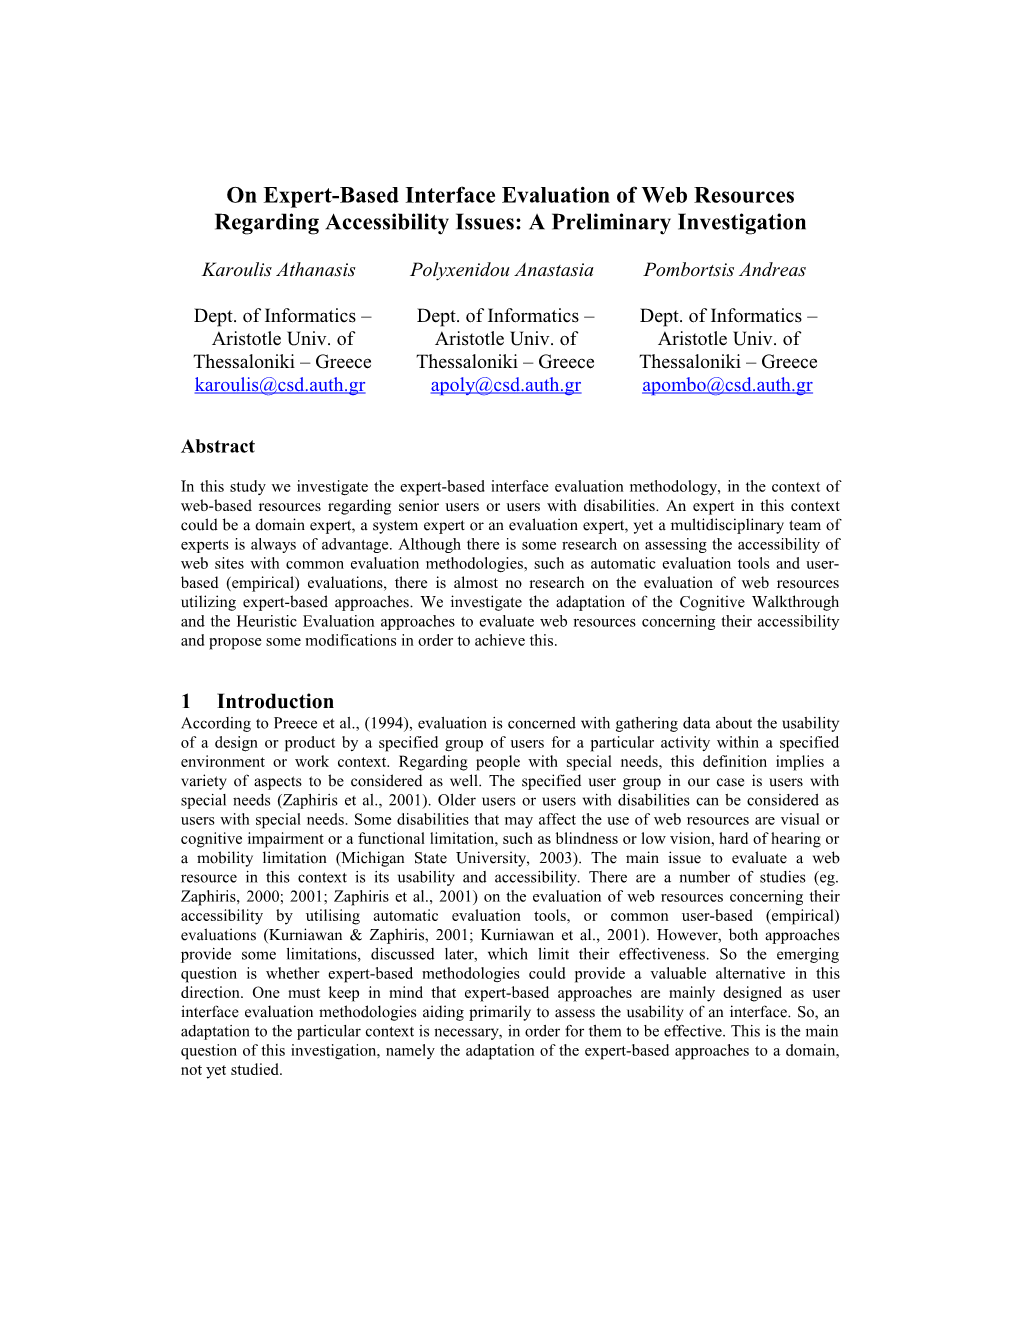 On Expert-Based Interface Evaluation of Web Resources Regarding Accessibility Issues